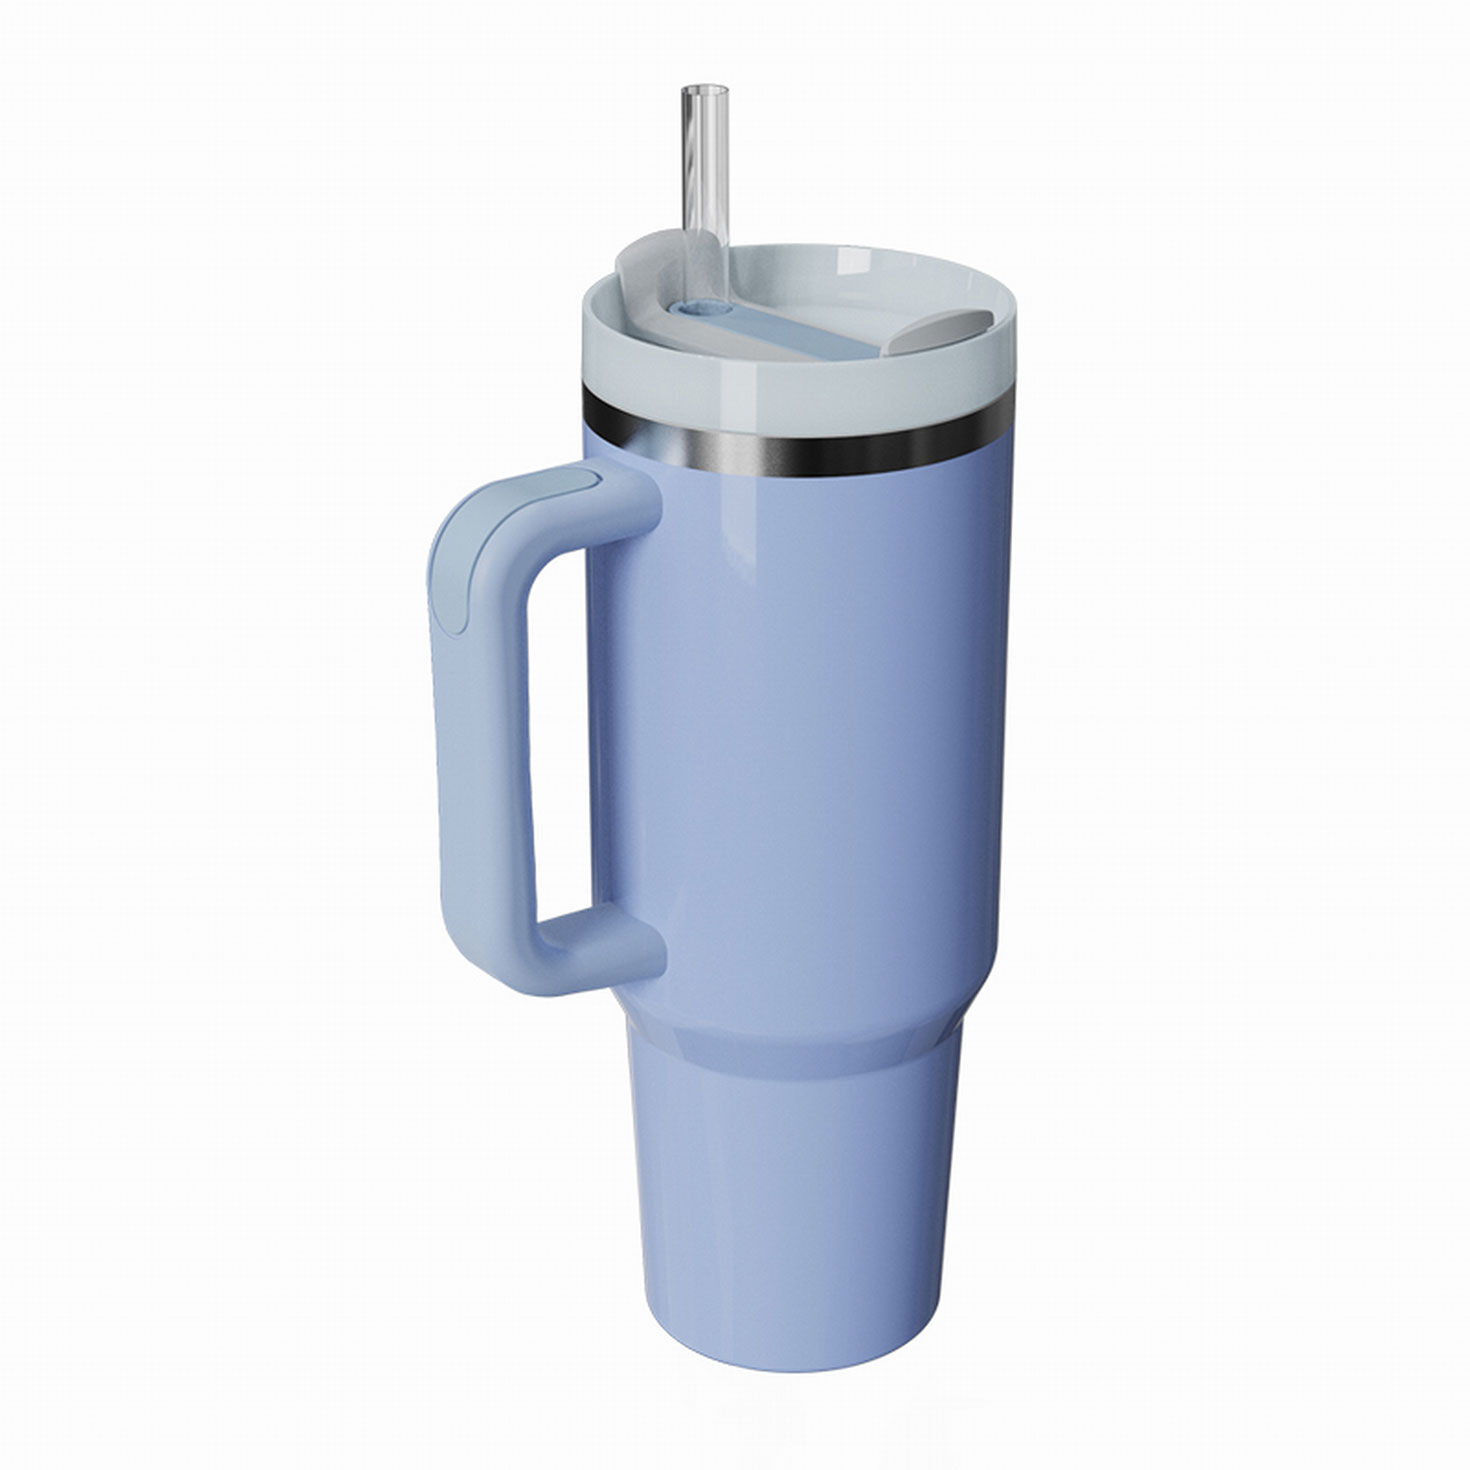 https://www.hallmark.com/dw/image/v2/AALB_PRD/on/demandware.static/-/Sites-hallmark-master/default/dw84ae5bf5/images/finished-goods/products/P218/Blue-Stainless-Steel-Travel-Mug-With-Handle-and-Straw_P218_01.jpg?sfrm=jpg